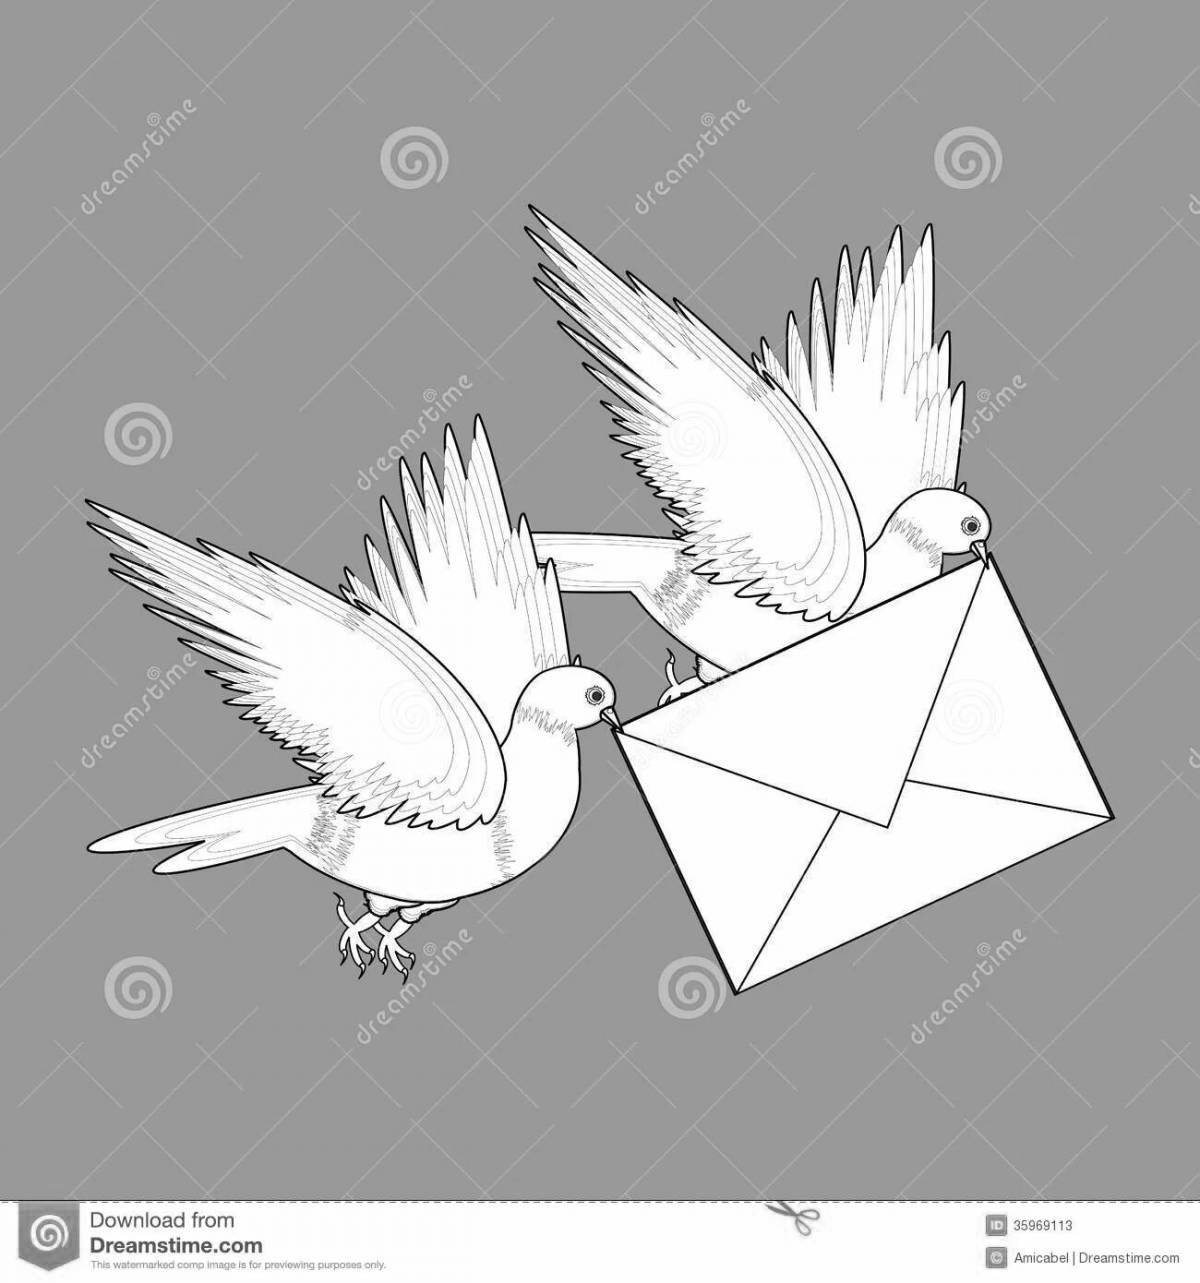 Delightful swallow with a letter